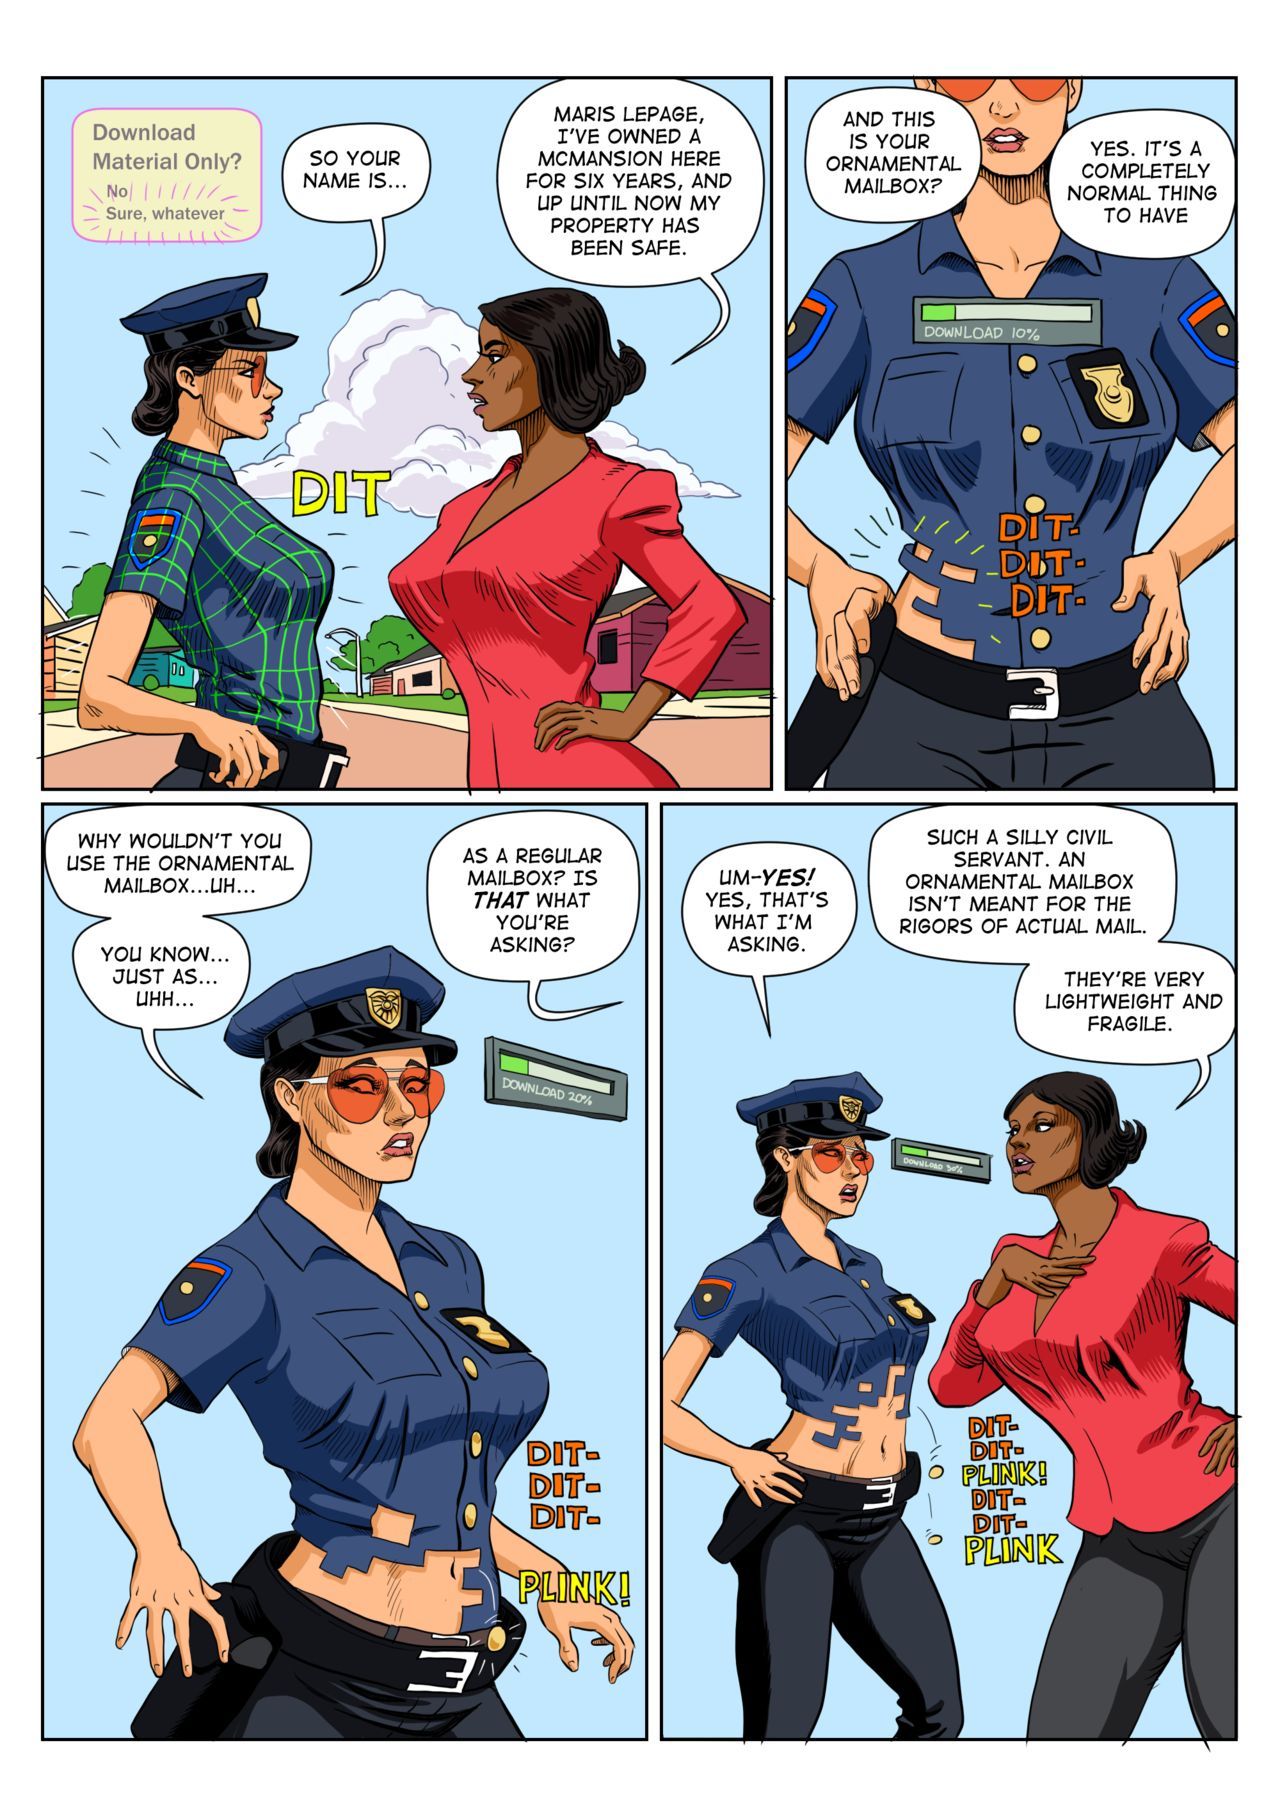 [Legmuscle] Police Investigation! (Ongoing) 4